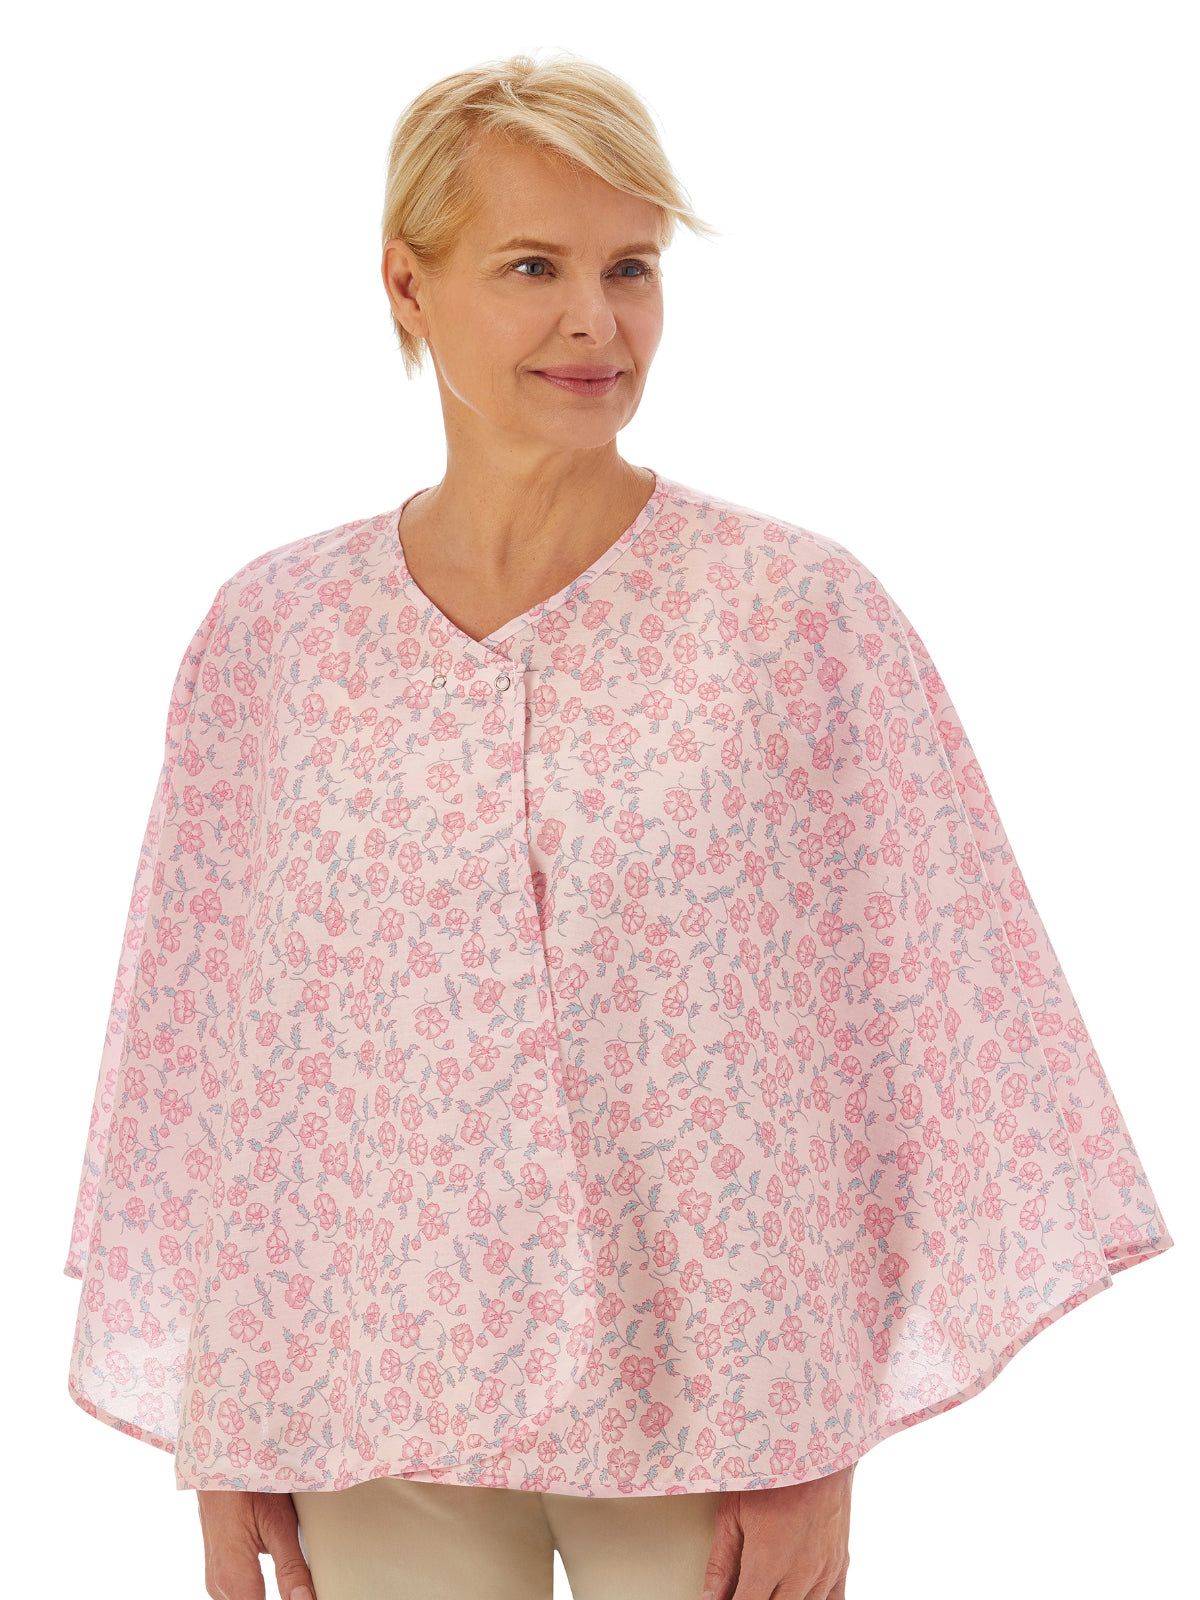 Women's Mammography Cape - 45893 - Vintage Rose